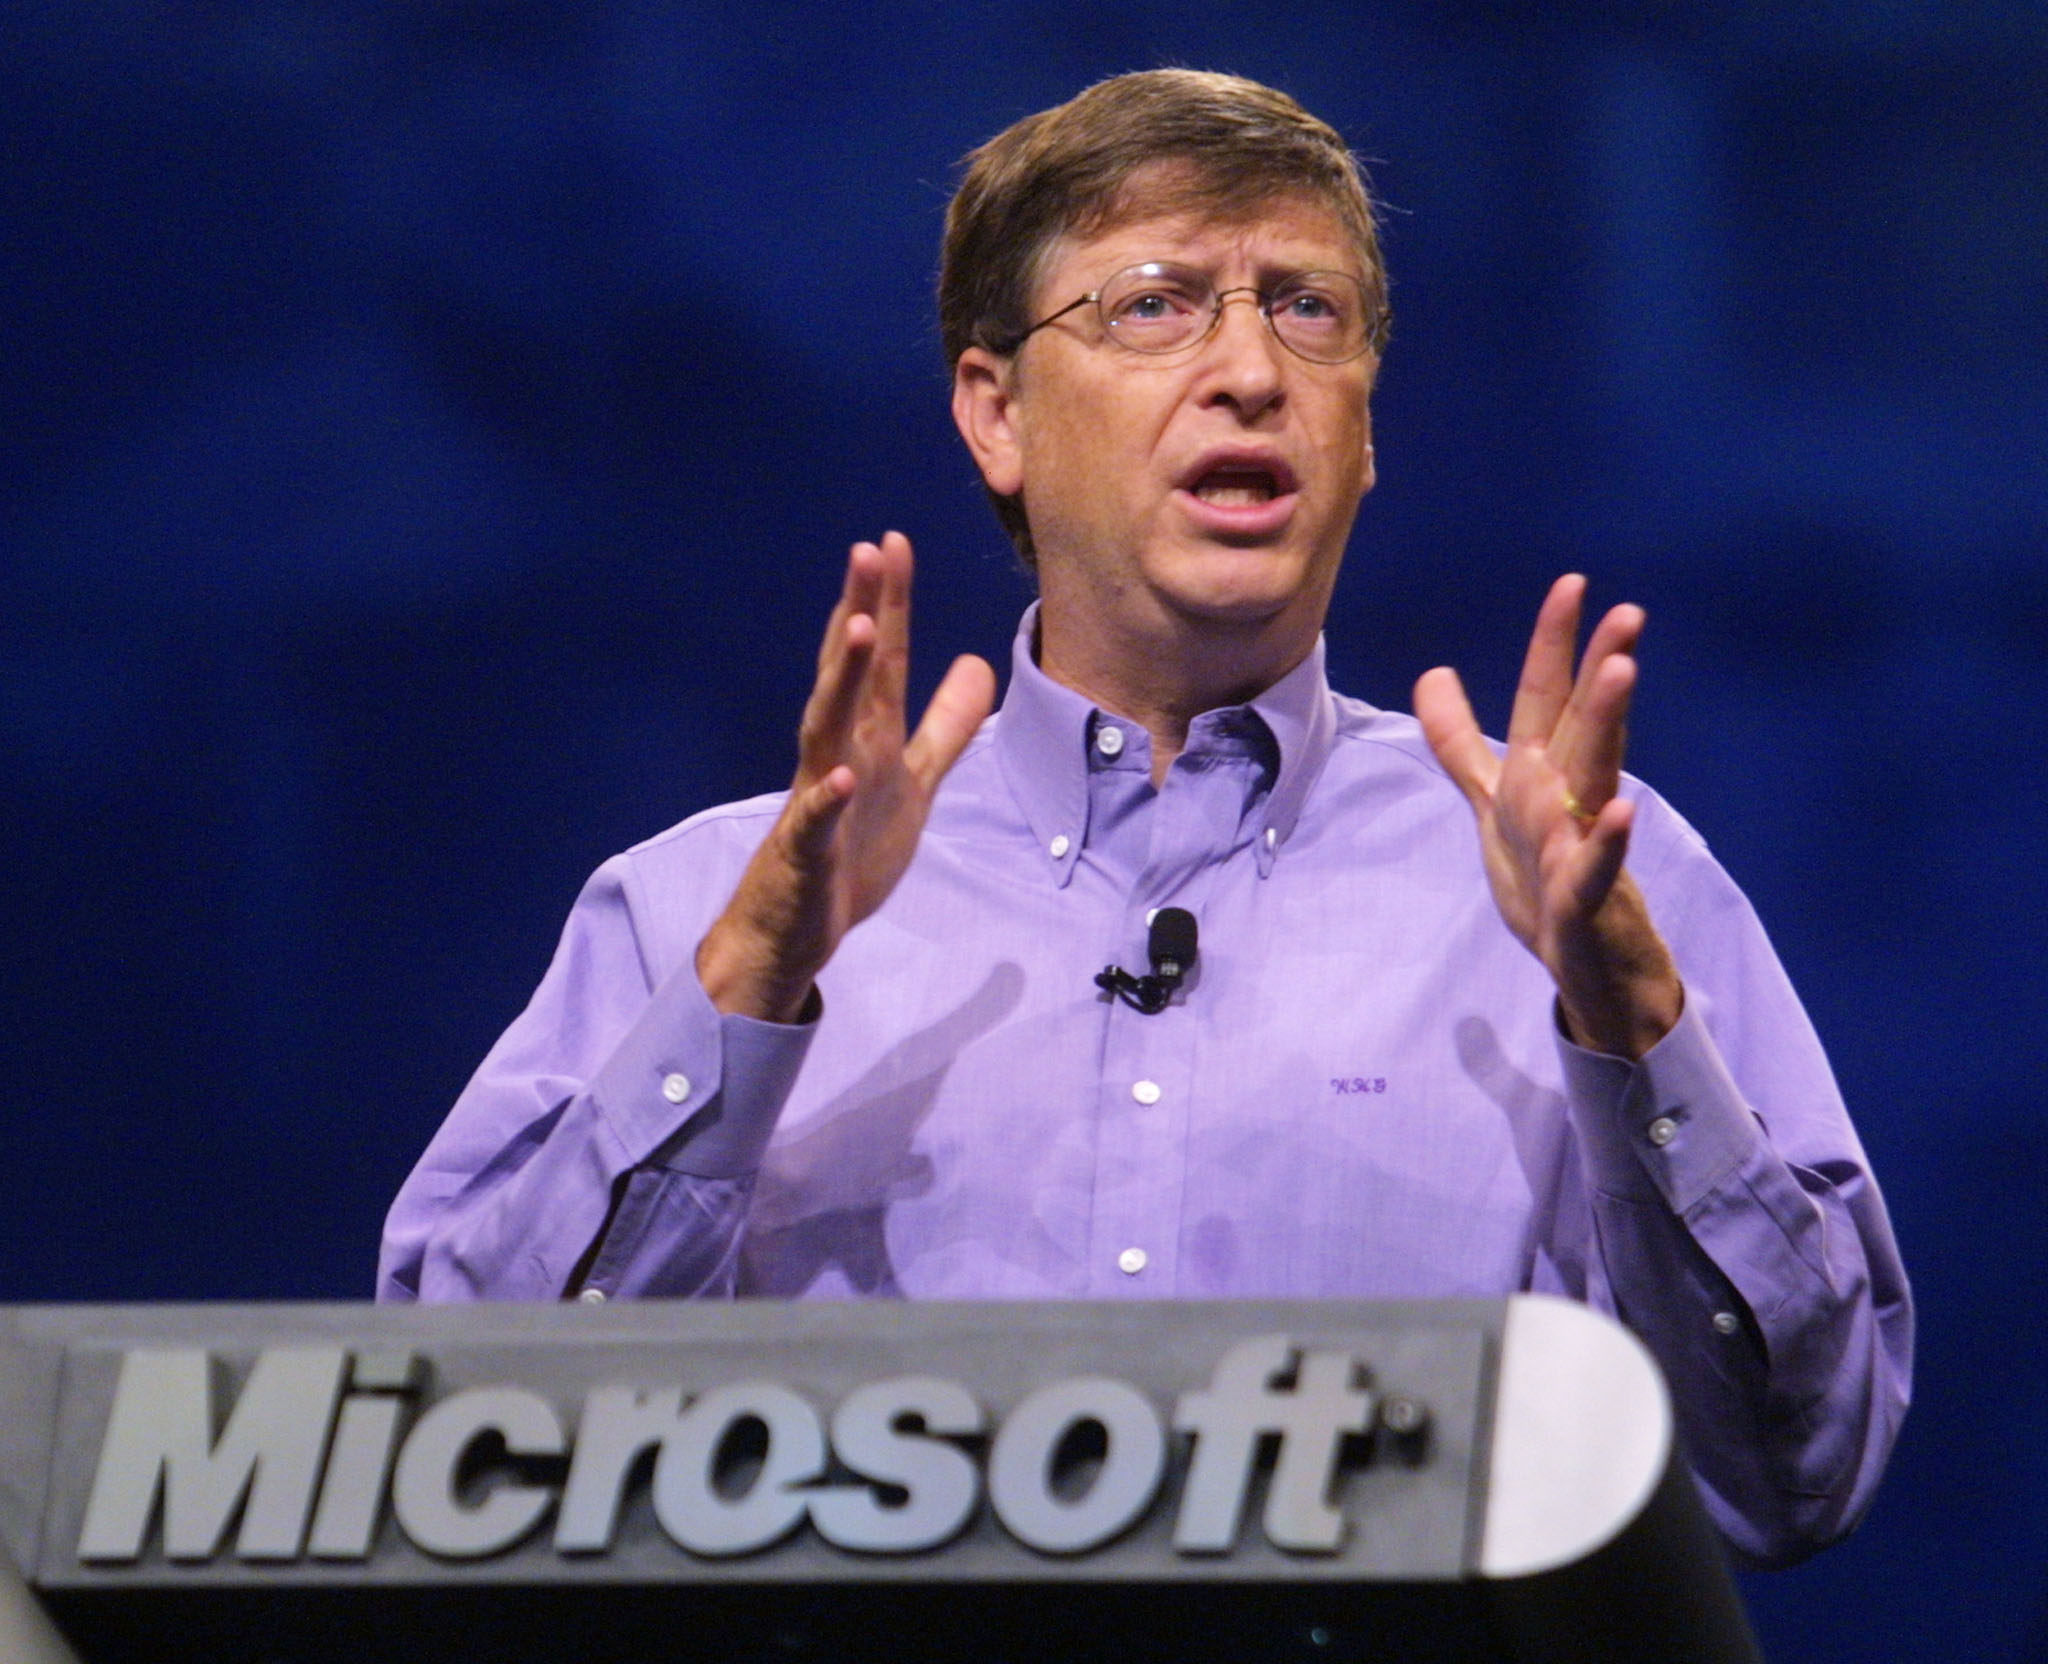 Bill Gates Doubling His Investment In Renewable Energy To $2Billion